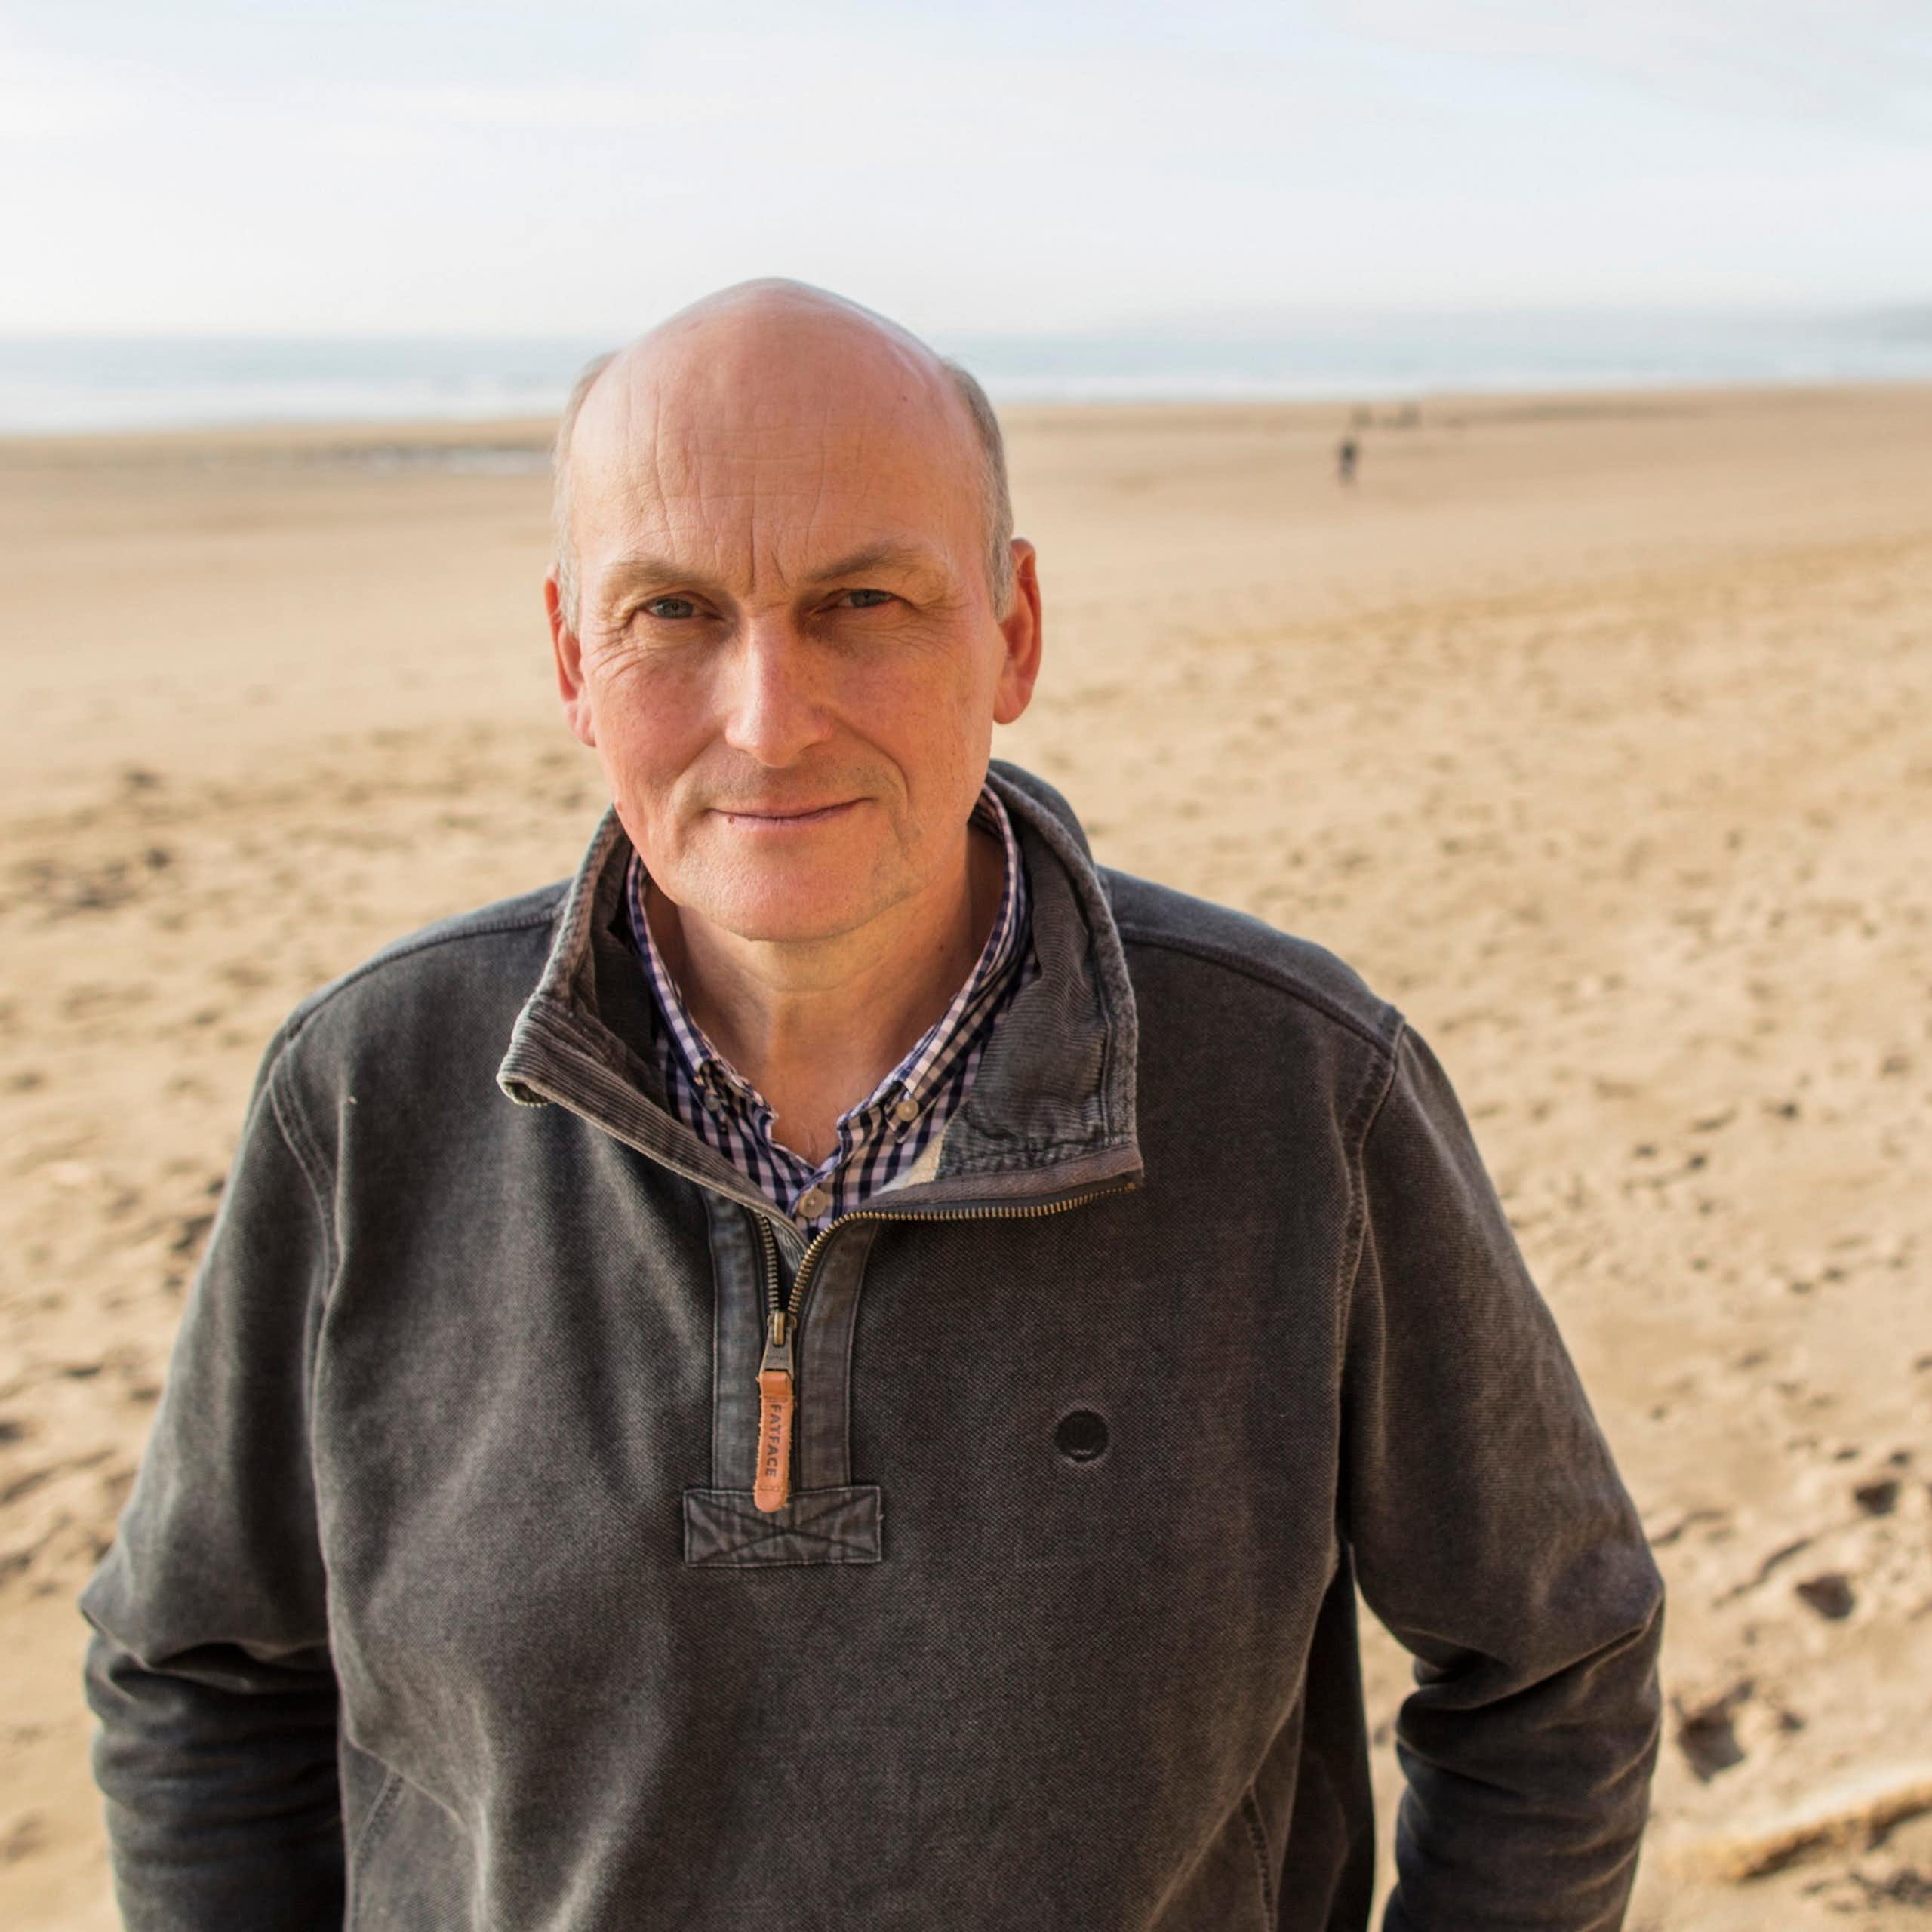 Man in grey jumper facing camera, wide empty sandy beach and sea in background